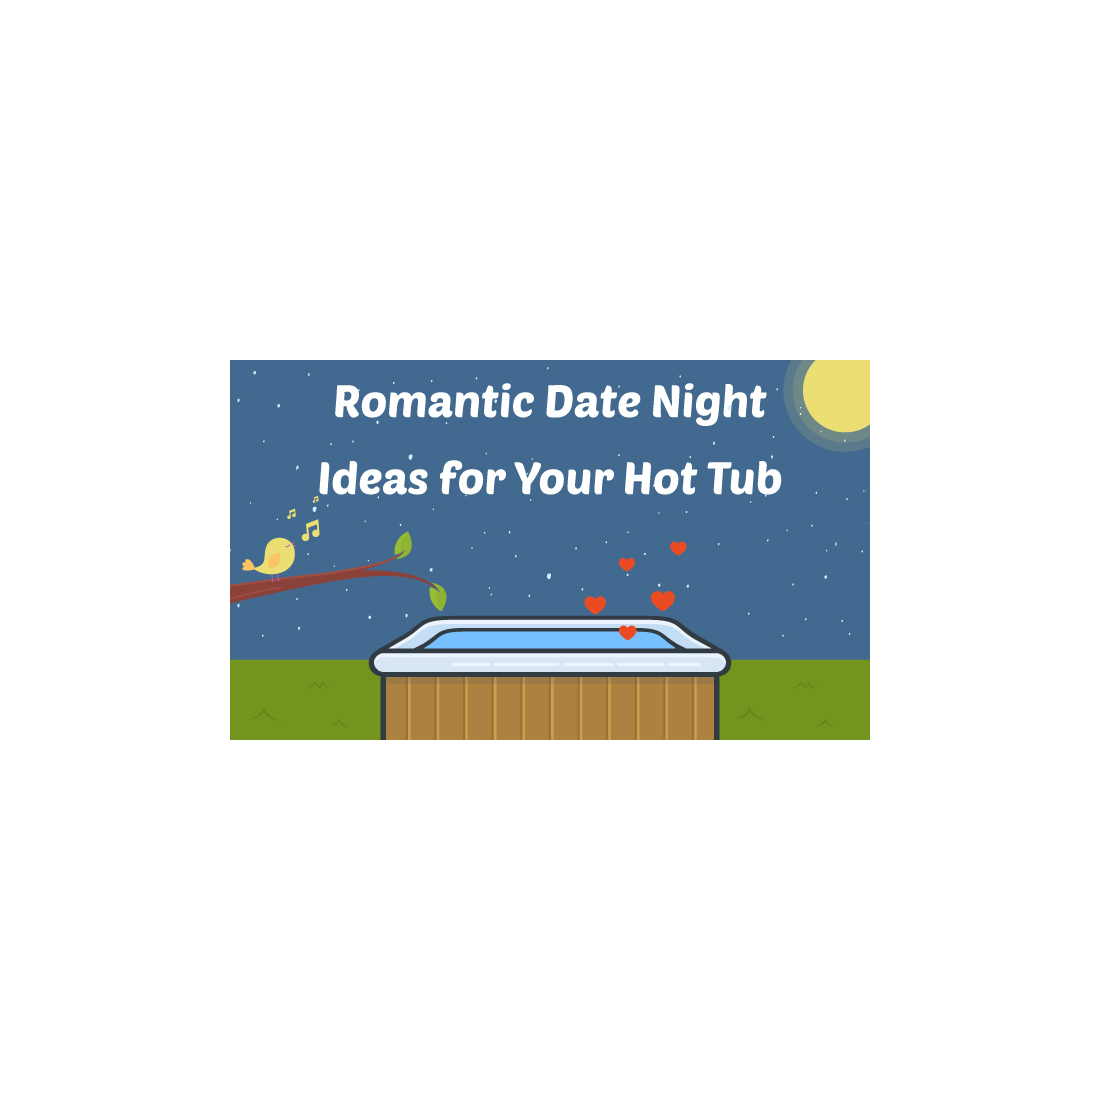 Romantic Date Night Ideas for Your Hot Tub